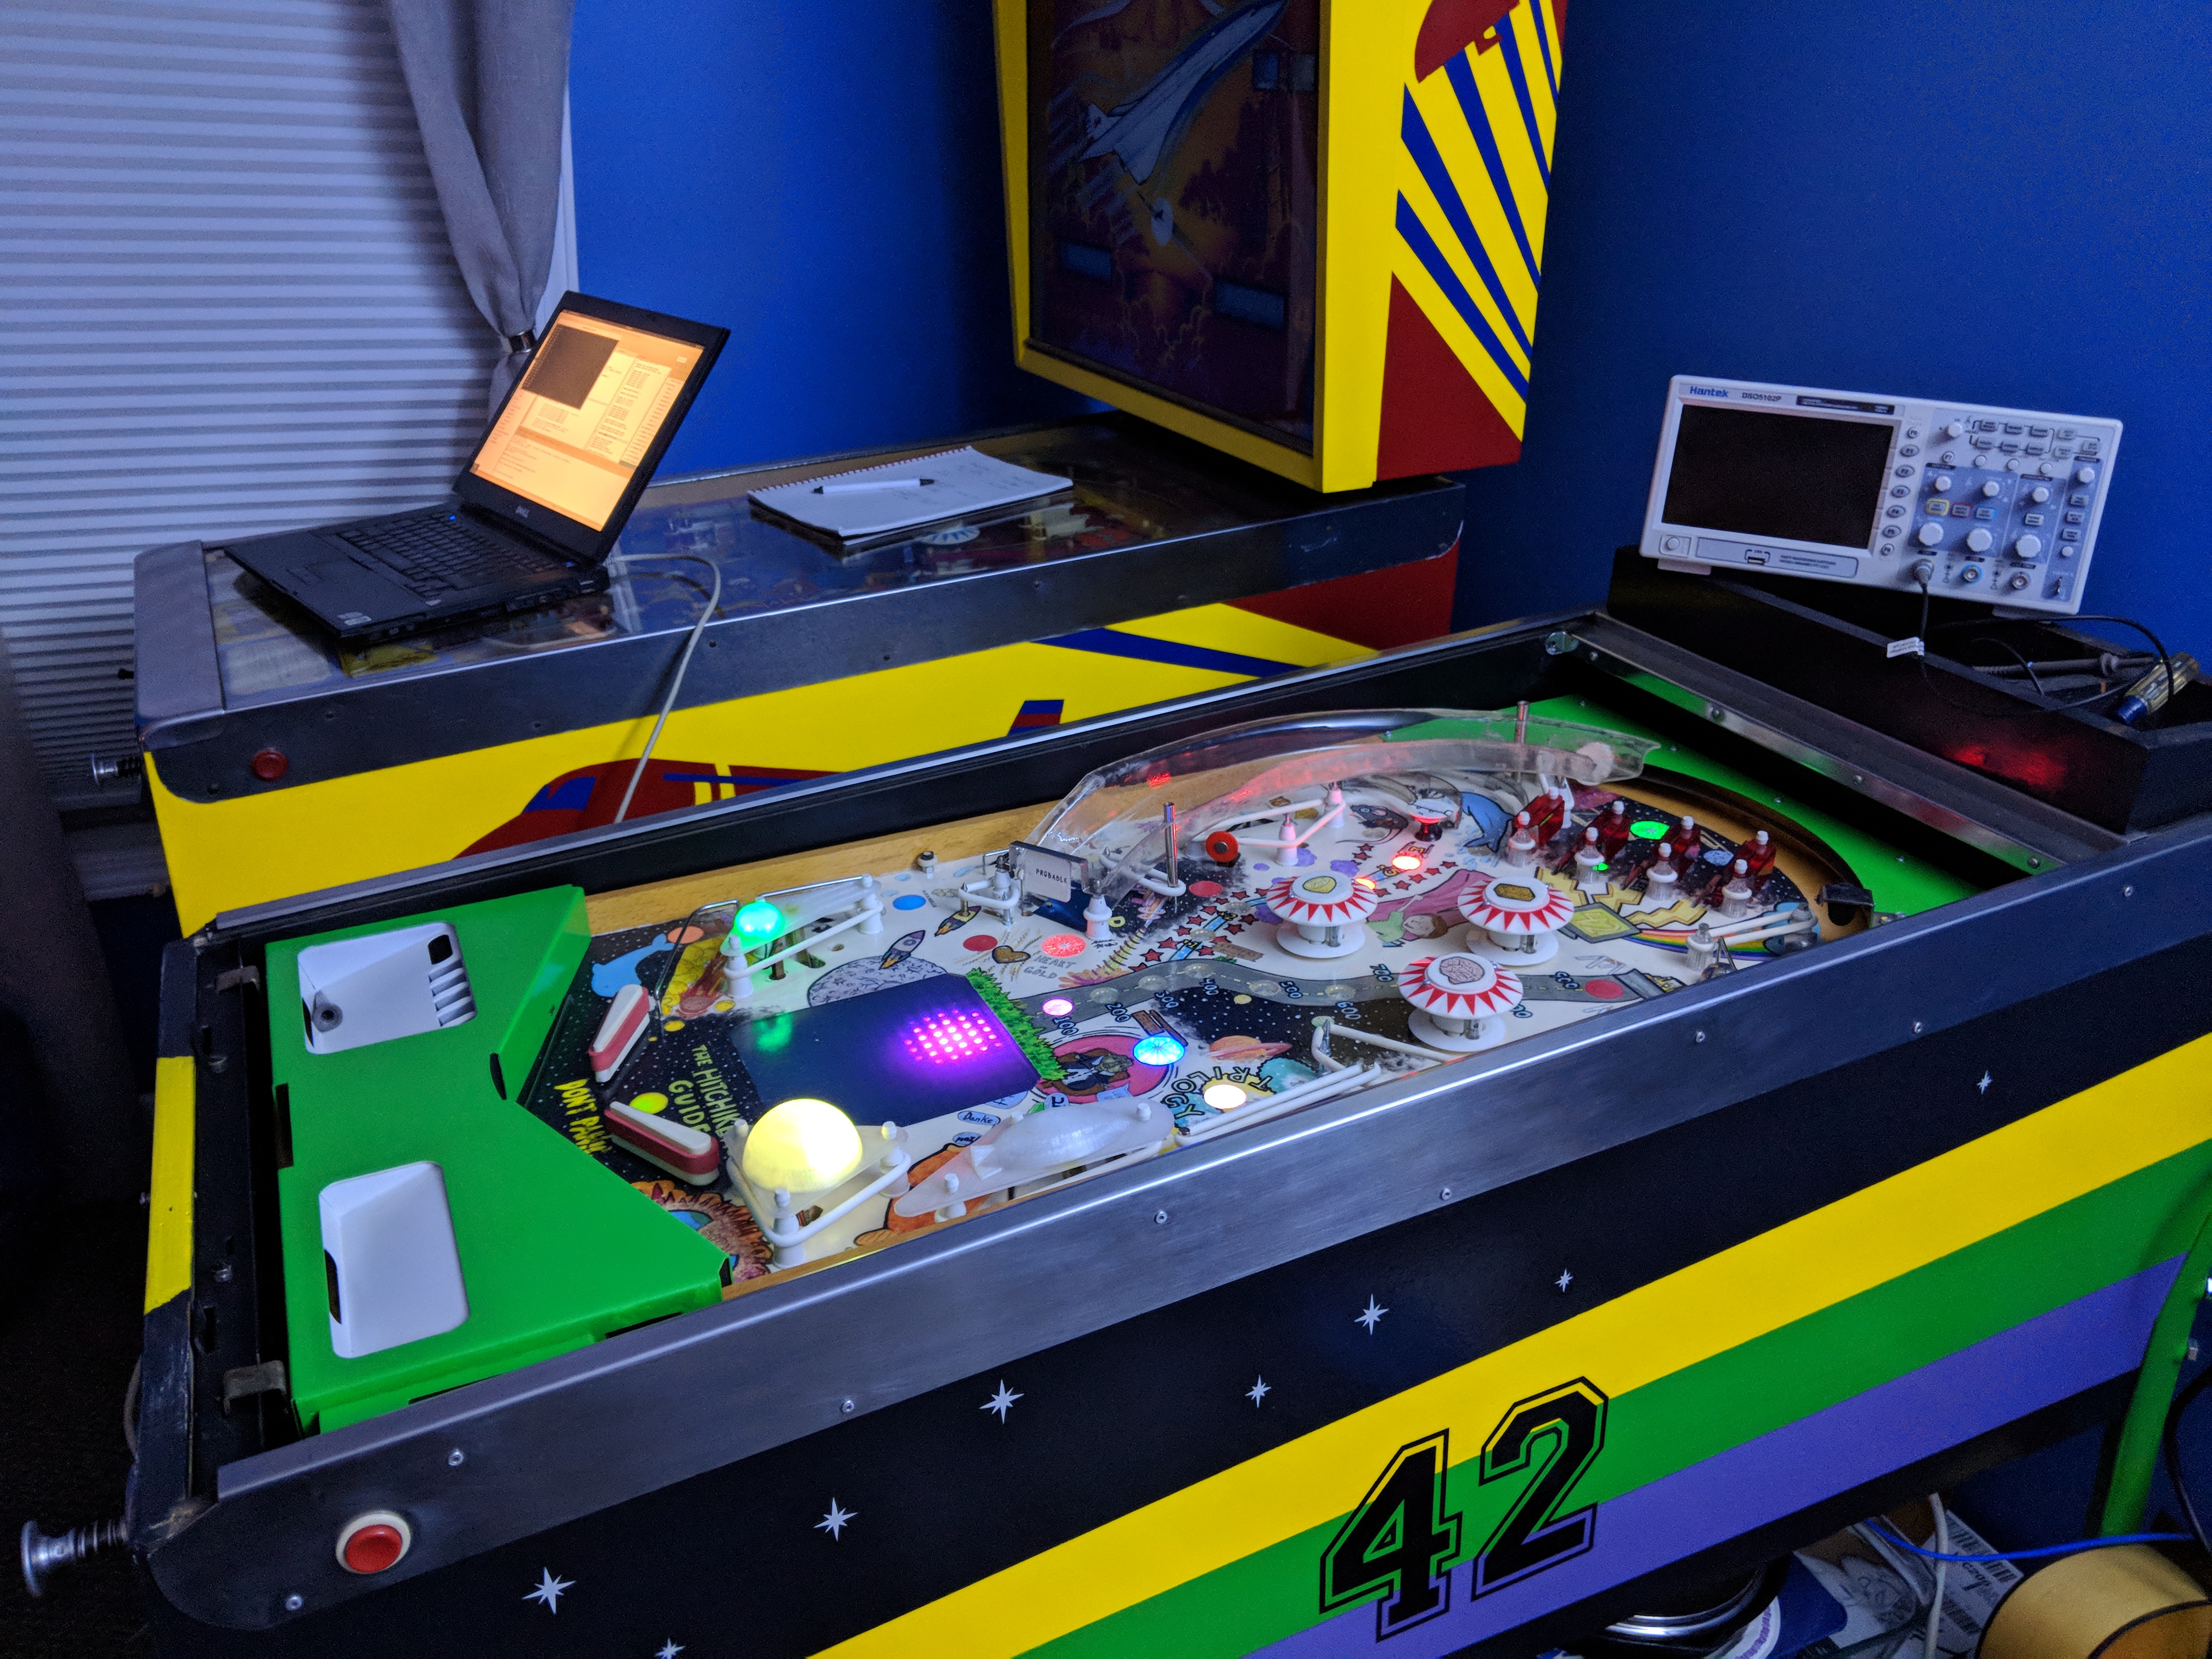 The Hitchhikers Guide to the Galaxy Pinball gameplay